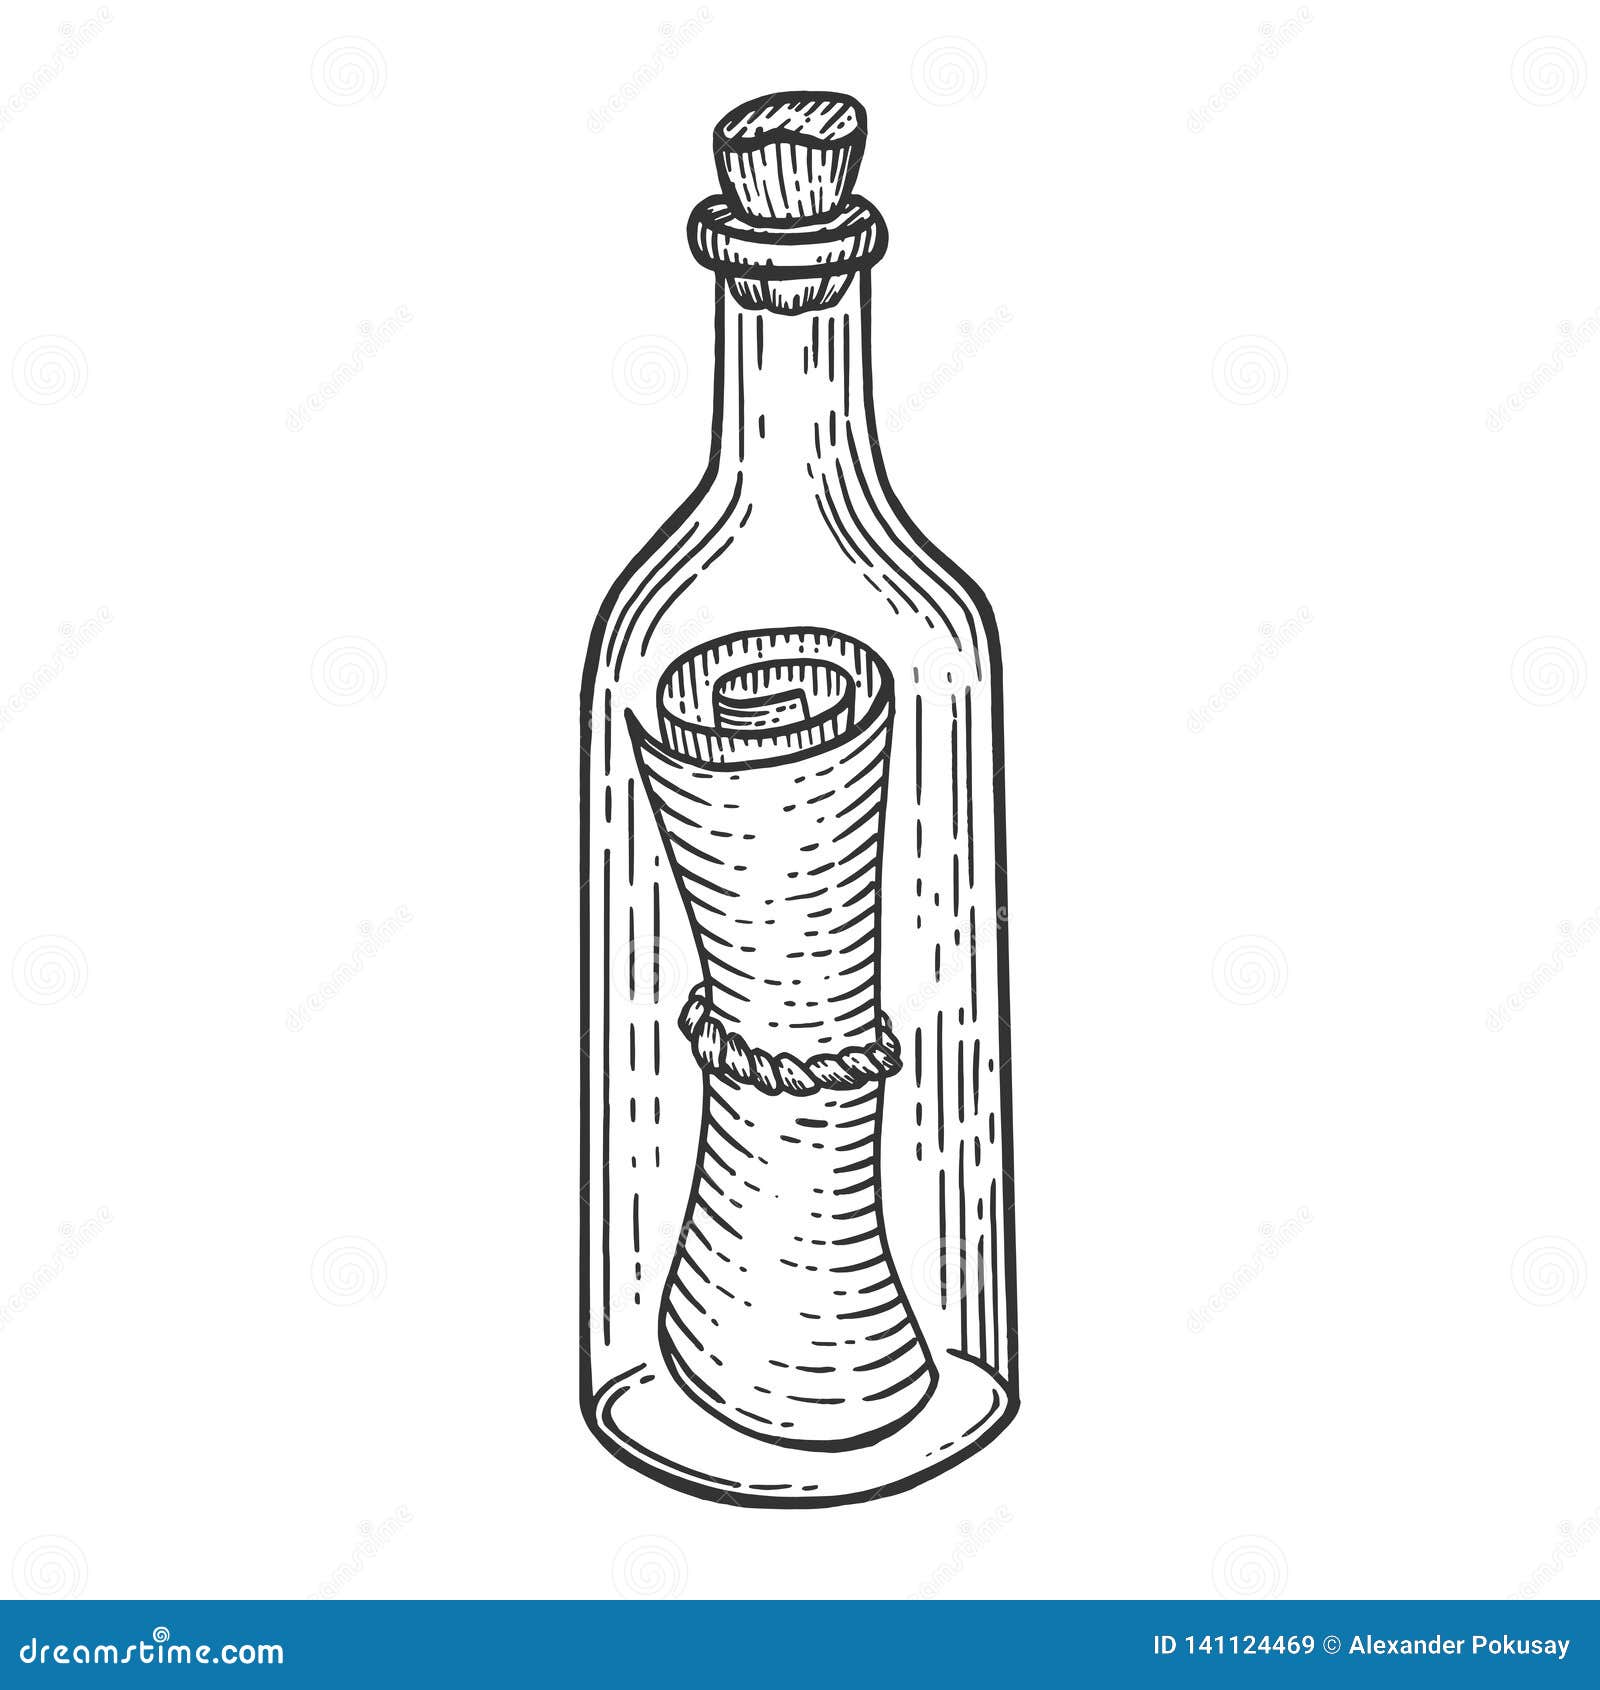 1600 Plastic Water Bottle Drawing Stock Photos Pictures  RoyaltyFree  Images  iStock